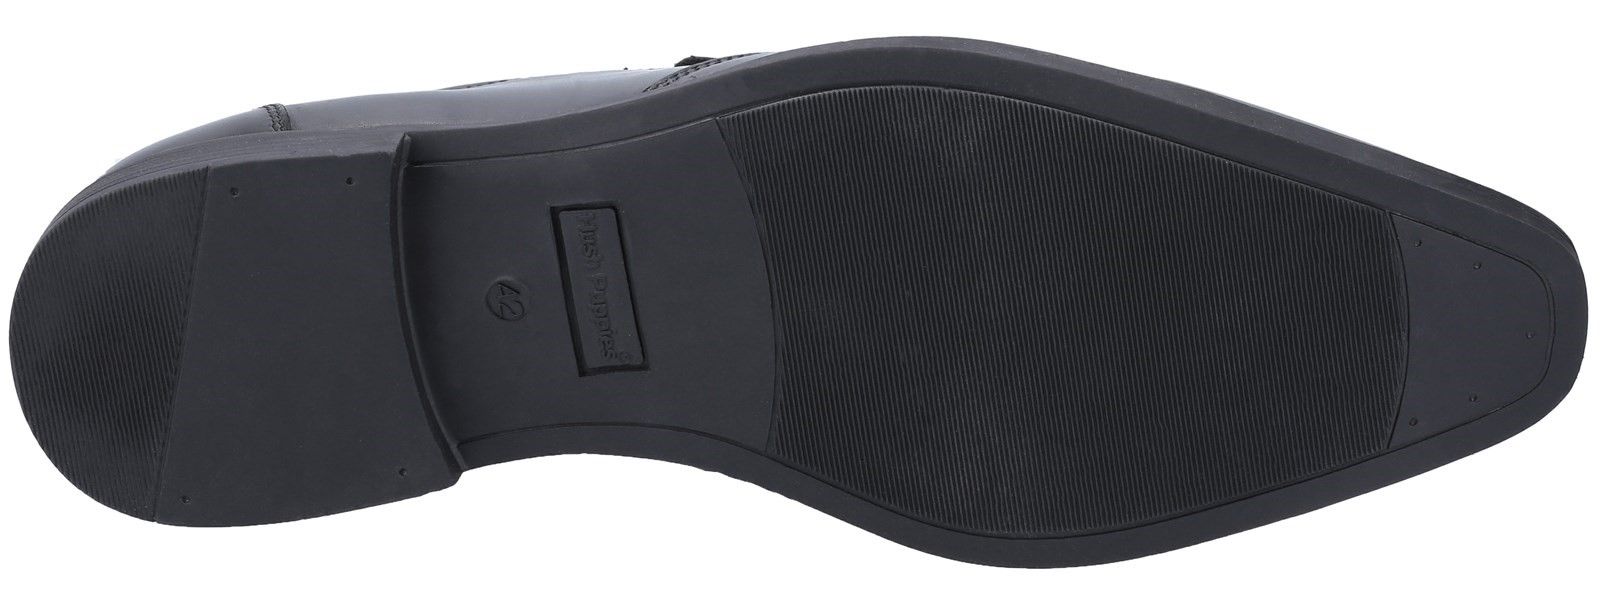 Ellis slip on shoe from Hush Puppies; Ellis is crafted with leather and has a memory foam footbed. The lightweight, flexible sole unit makes this the perfect smart footwear all day.Smart Leather Upper. 
Square toe. 
Hardwearing Rubber outsole. 
Memory Foam Sock. 
Twin Elastic Gussets for easy on and off.